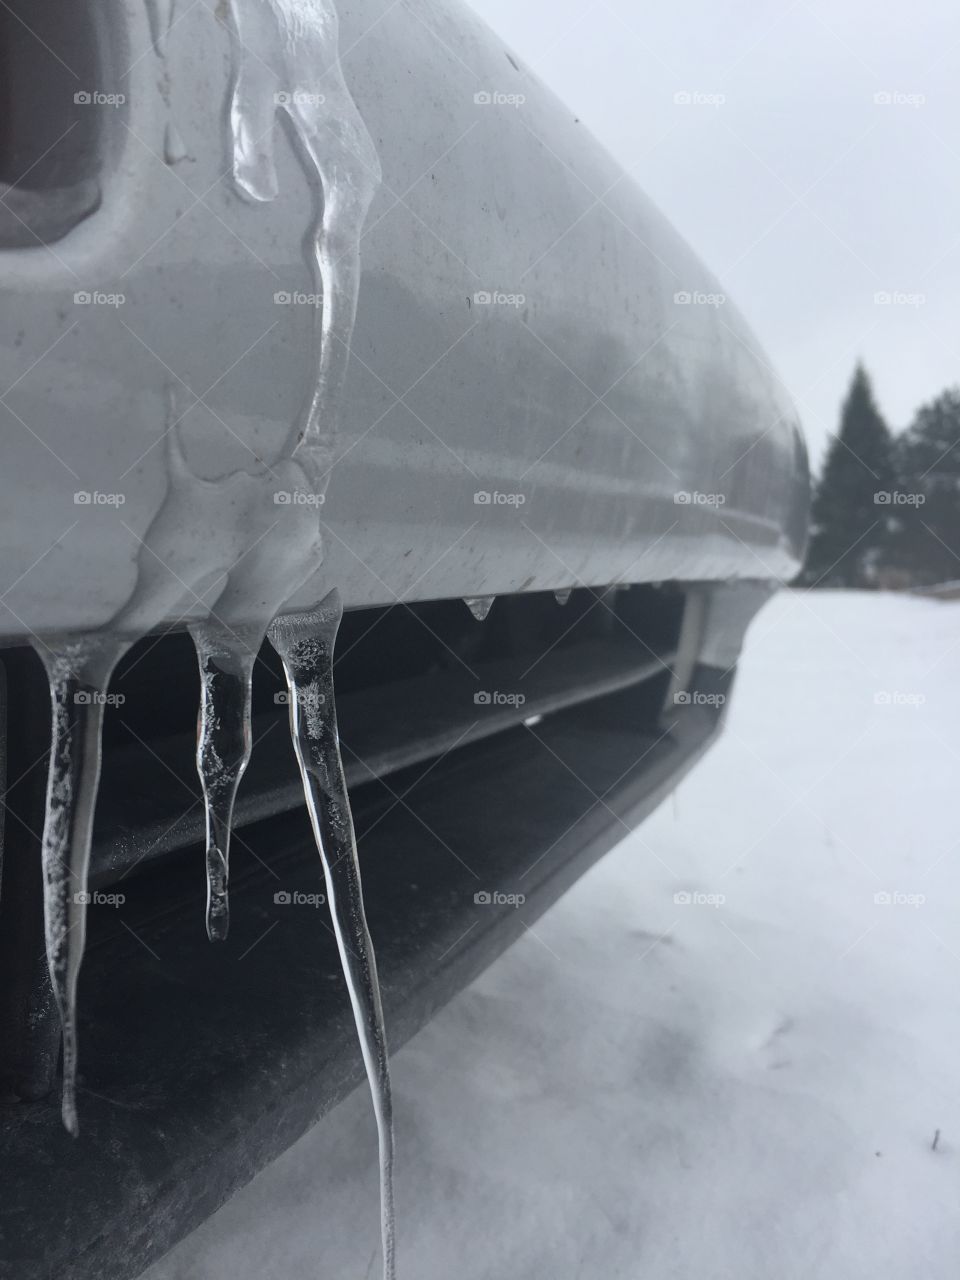 Icicles on my front bumper cover